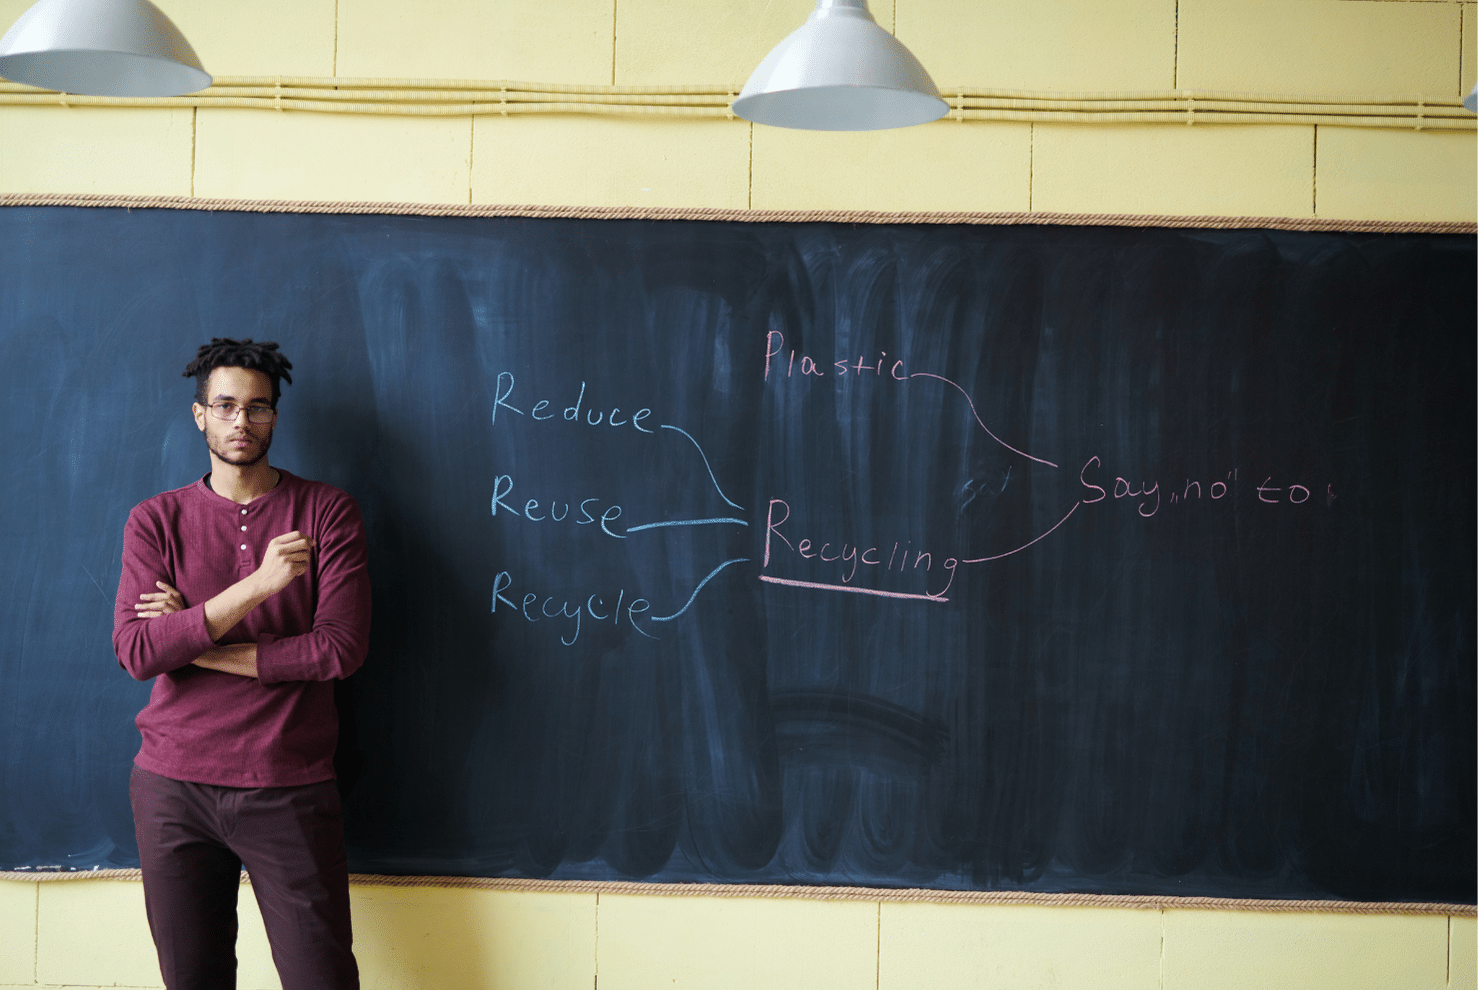 A man facing the camera stands in front of a chalkboard that contains a handwritten cloud diagram with the words 